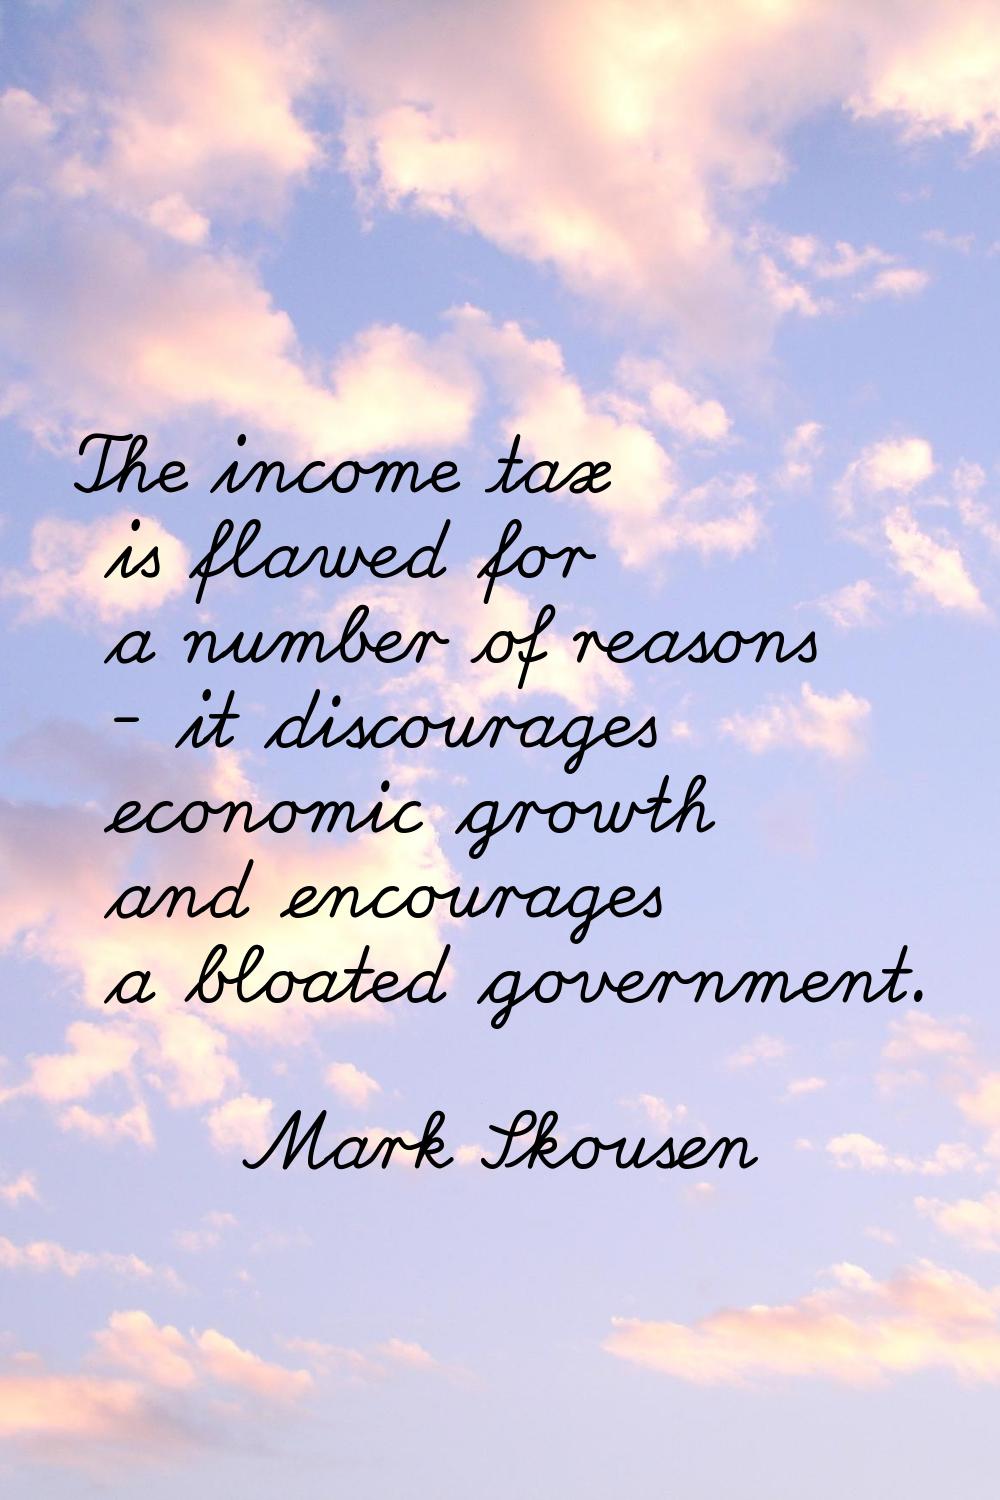 The income tax is flawed for a number of reasons - it discourages economic growth and encourages a 